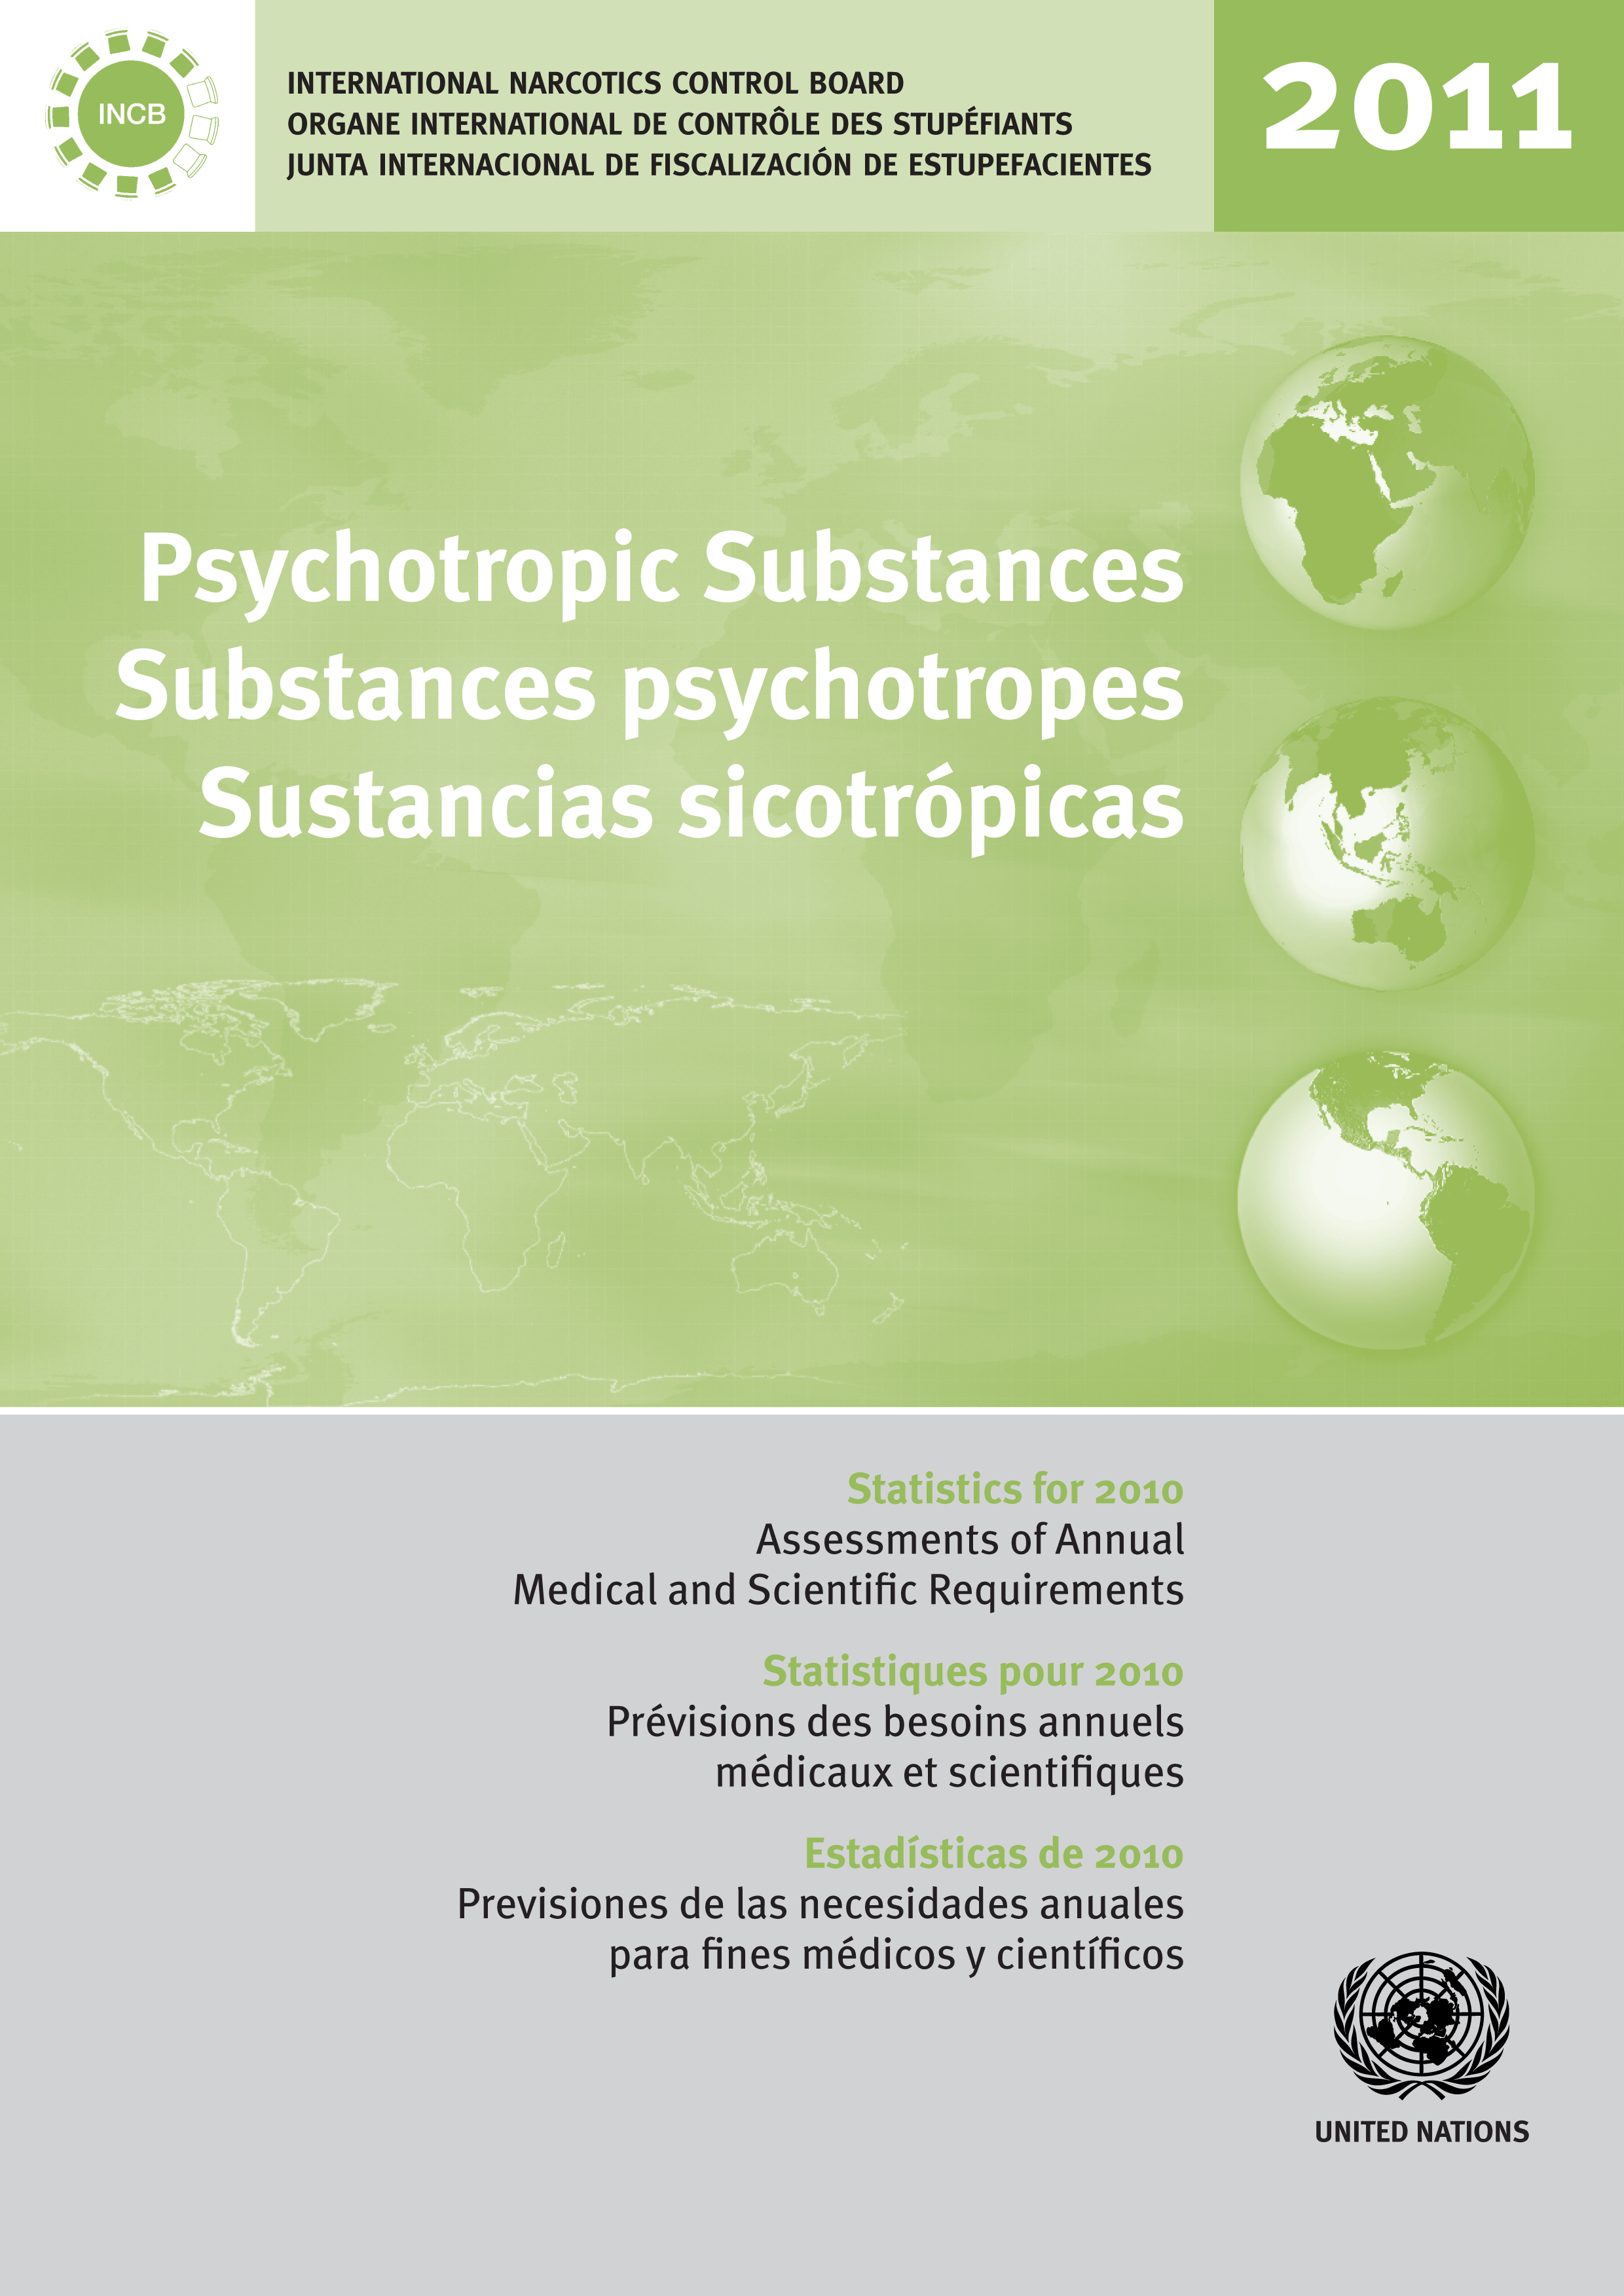 image of Assessments of annual medical and scientific requirements for substances listed in Schedules II, III and IV of the Convention on Psychotropic Substances of 1971